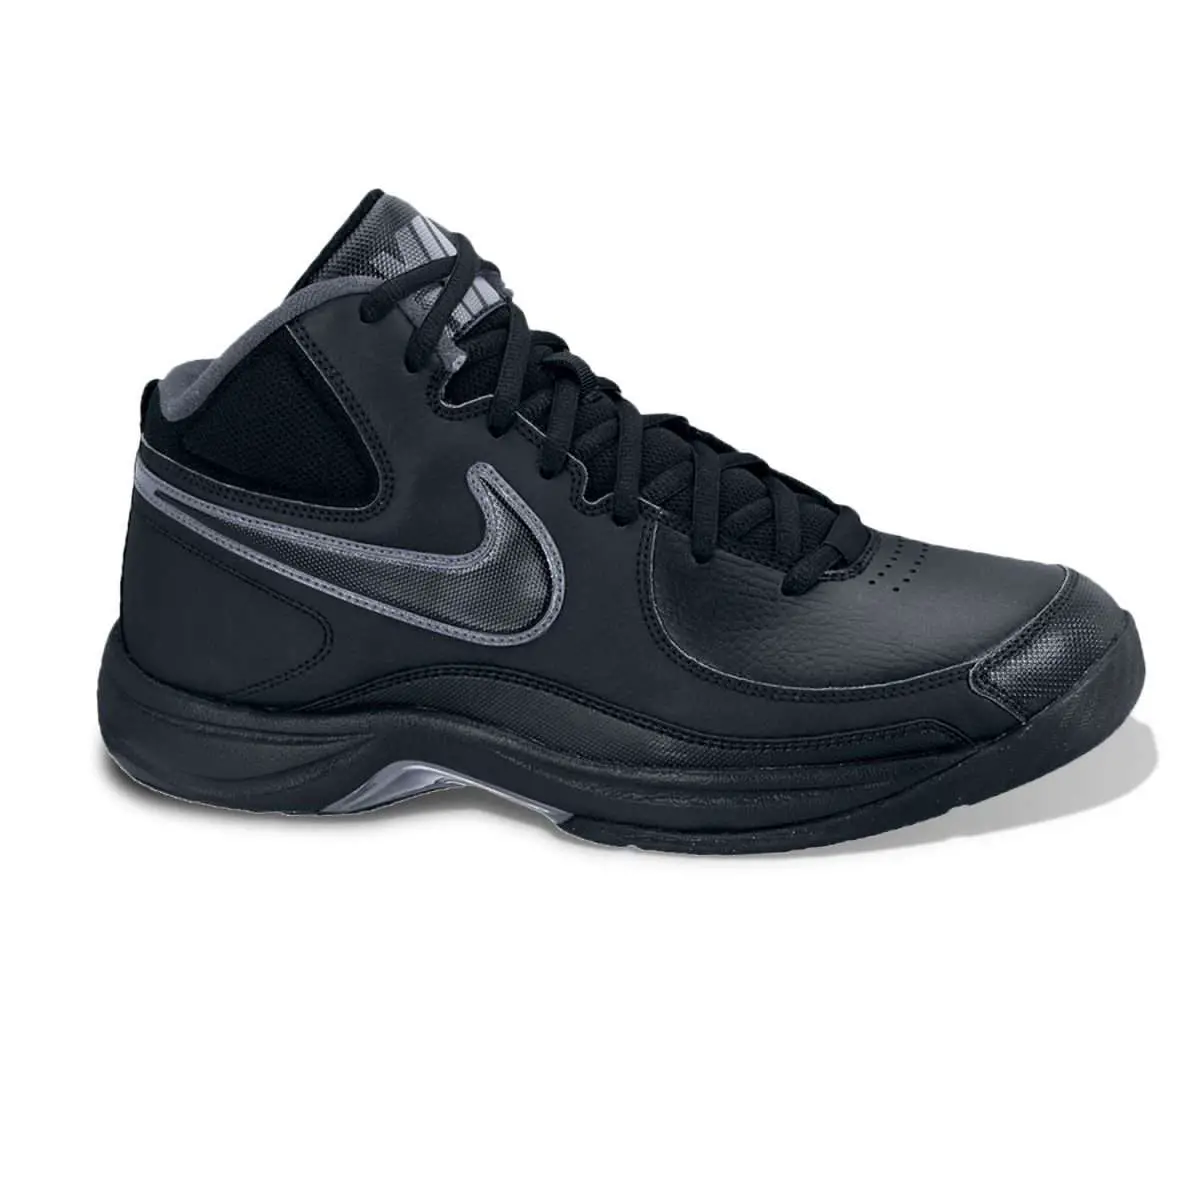 NIKE BLACK OVERPLAY VII EXTRA WIDE BASKETBALL SHOES